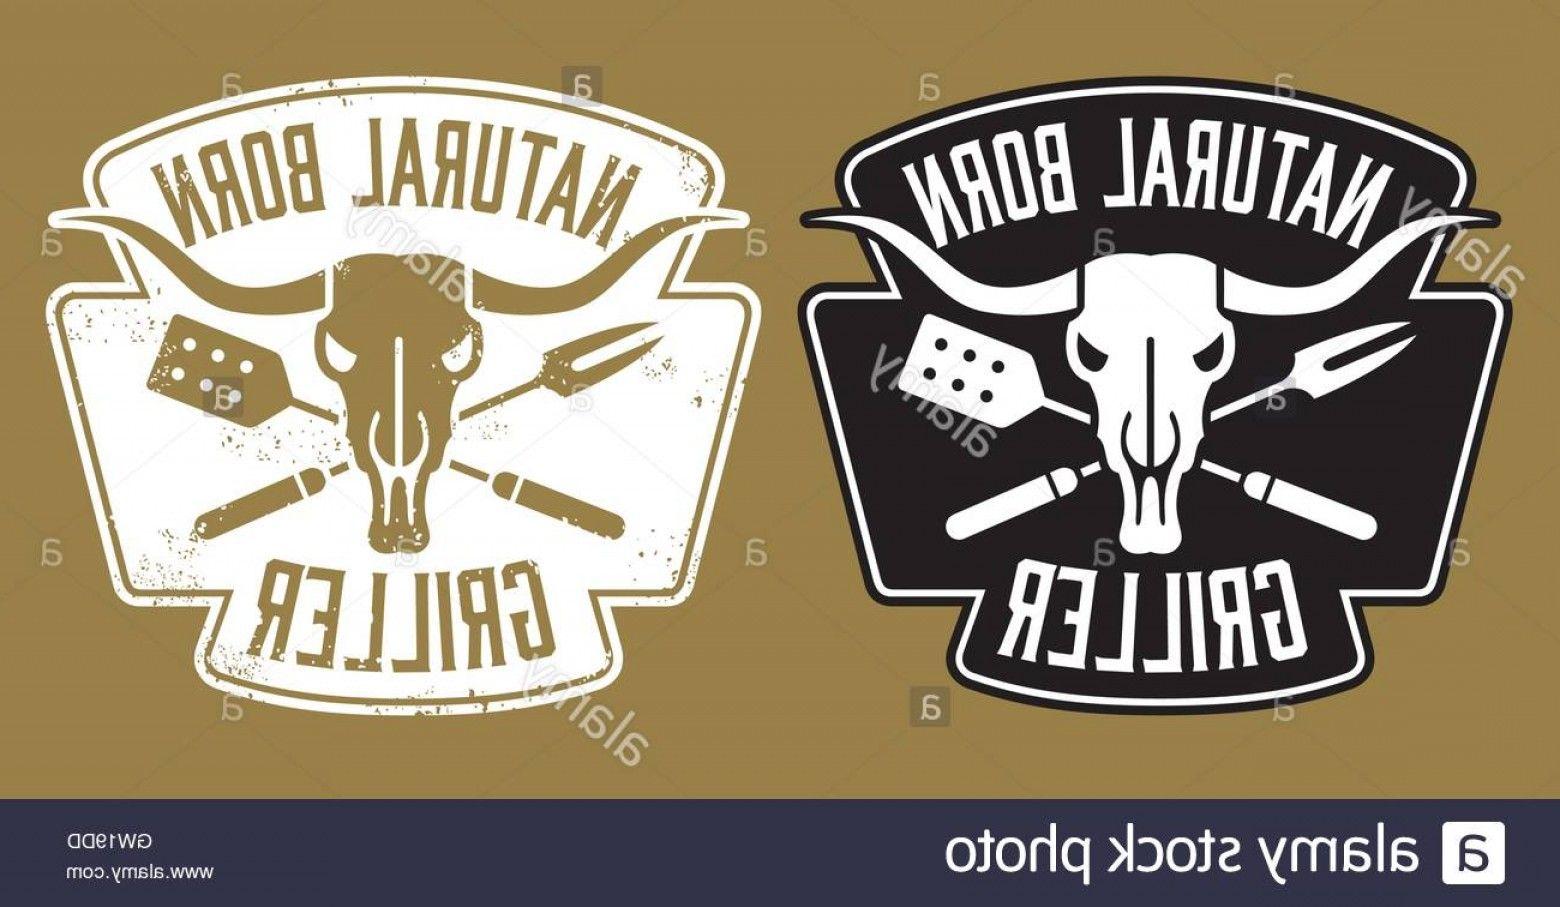 The Griller Logo - Stock Photo Natural Born Griller Barbecue Logo With Cow Skull And ...